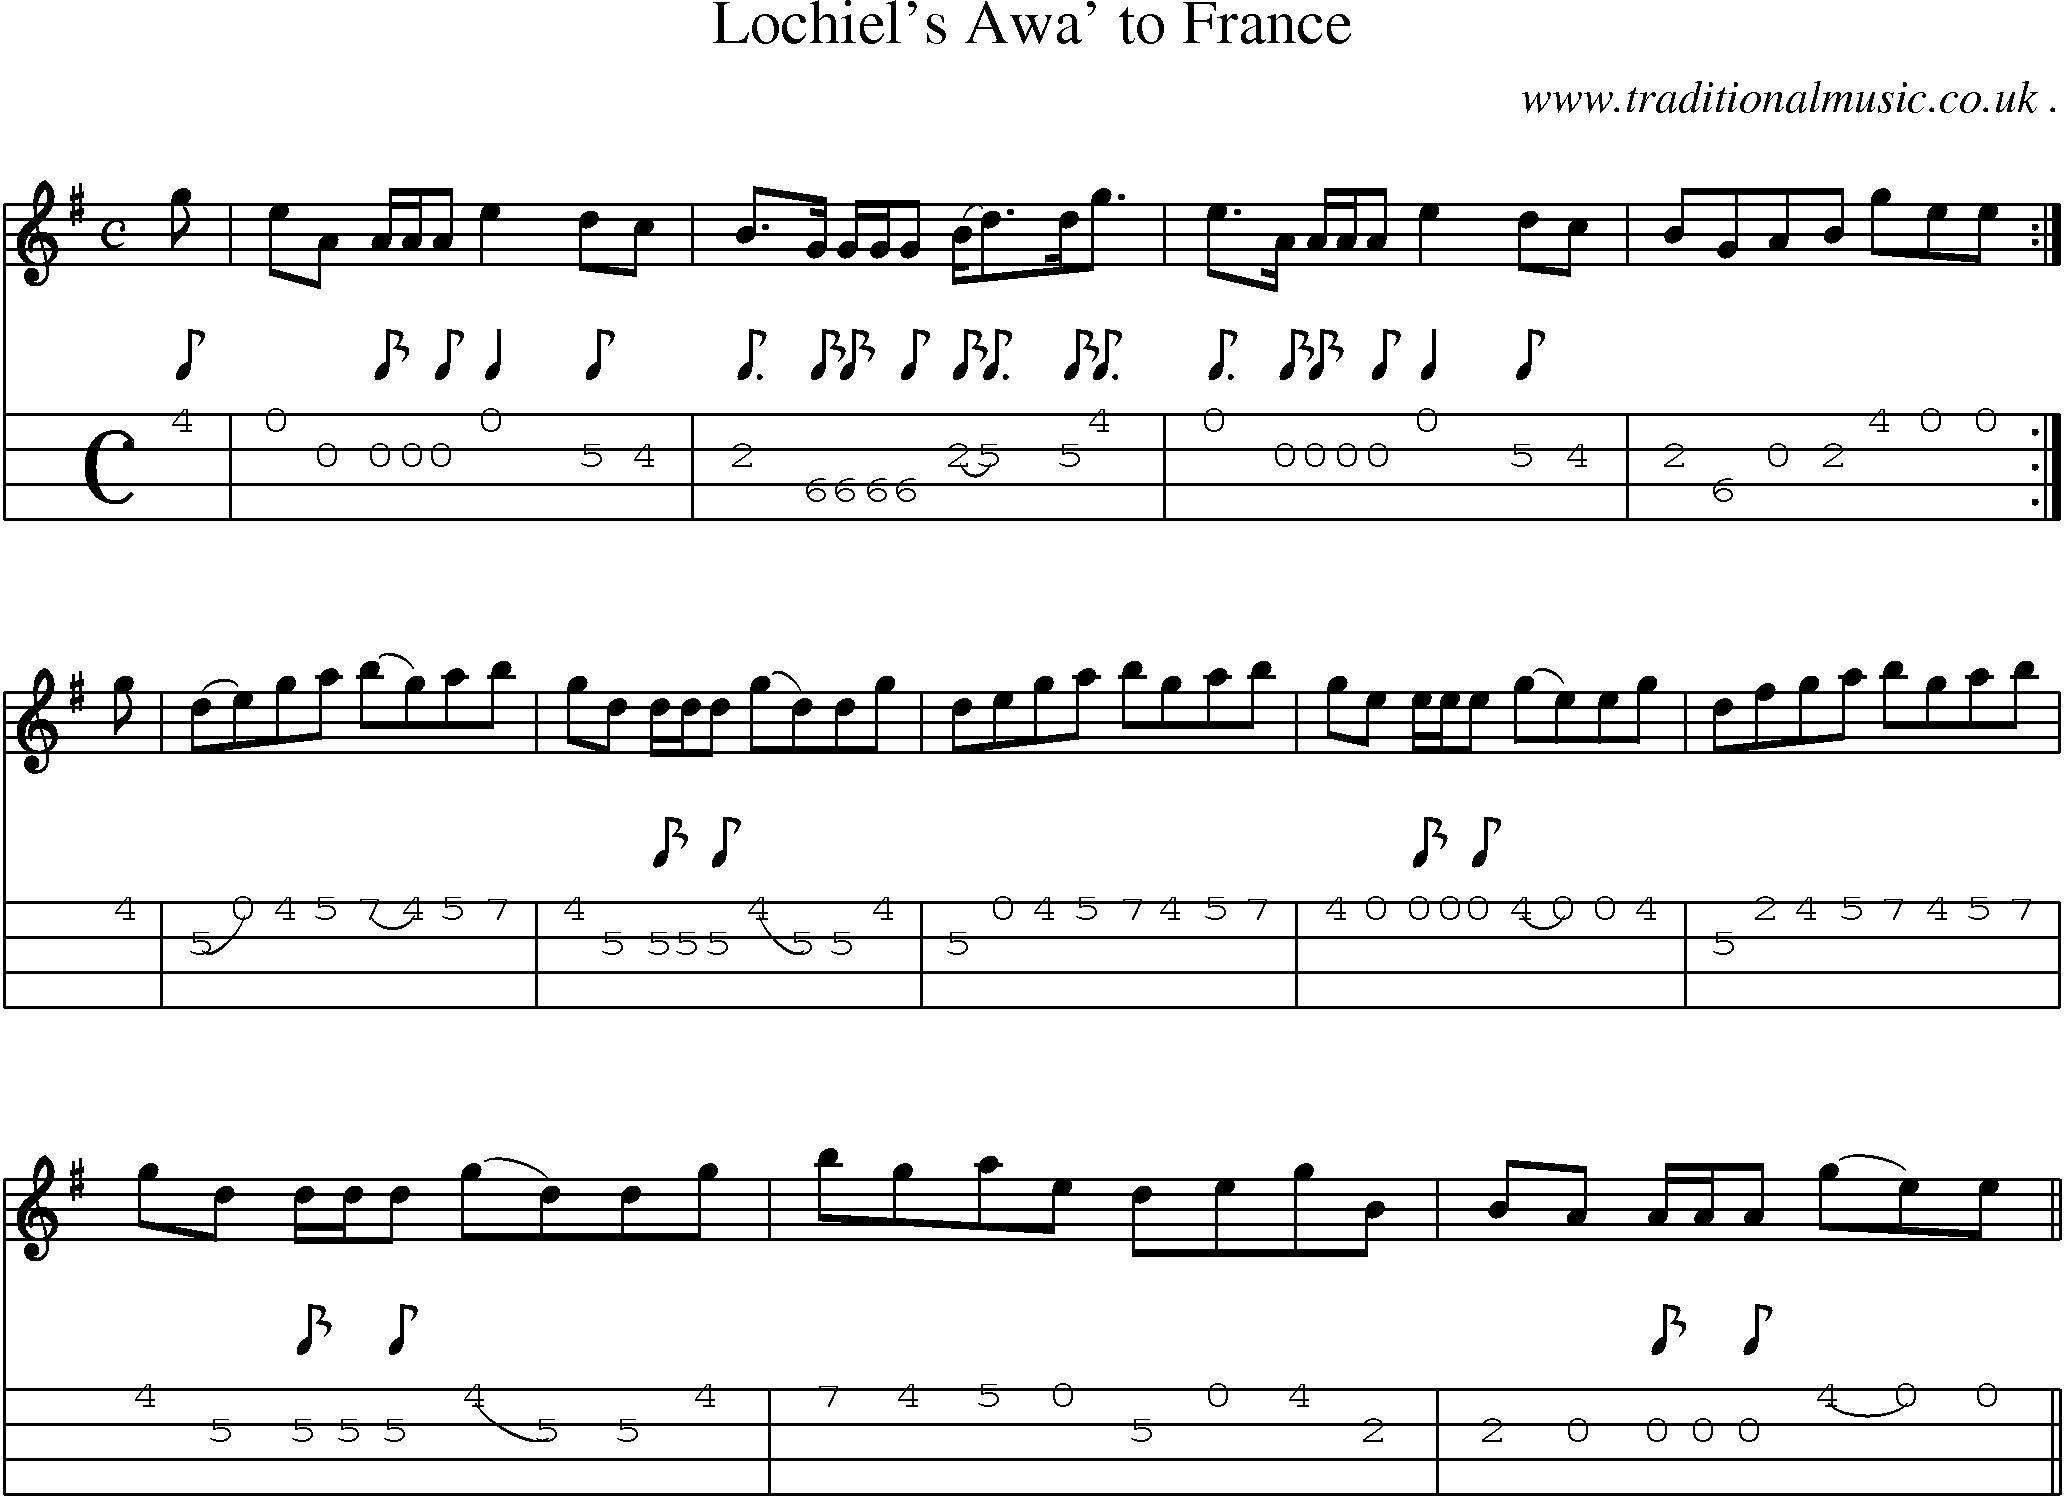 Sheet-music  score, Chords and Mandolin Tabs for Lochiels Awa To France